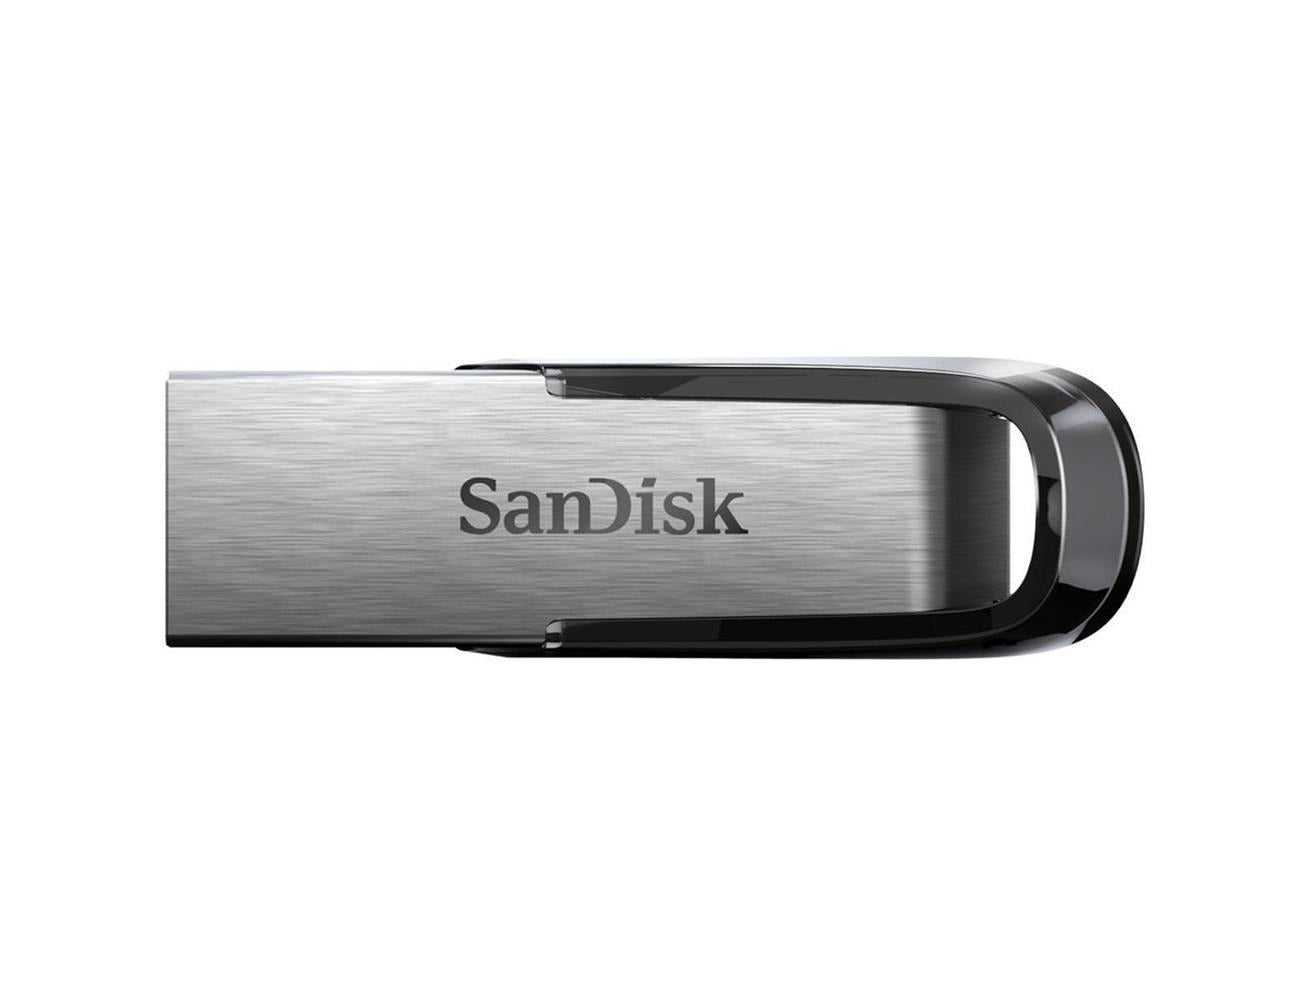 SanDisk 16GB Ultra SDCZ73-016G-G46 USB 3.0 Flash Drive , Speed Up to 150MB//S